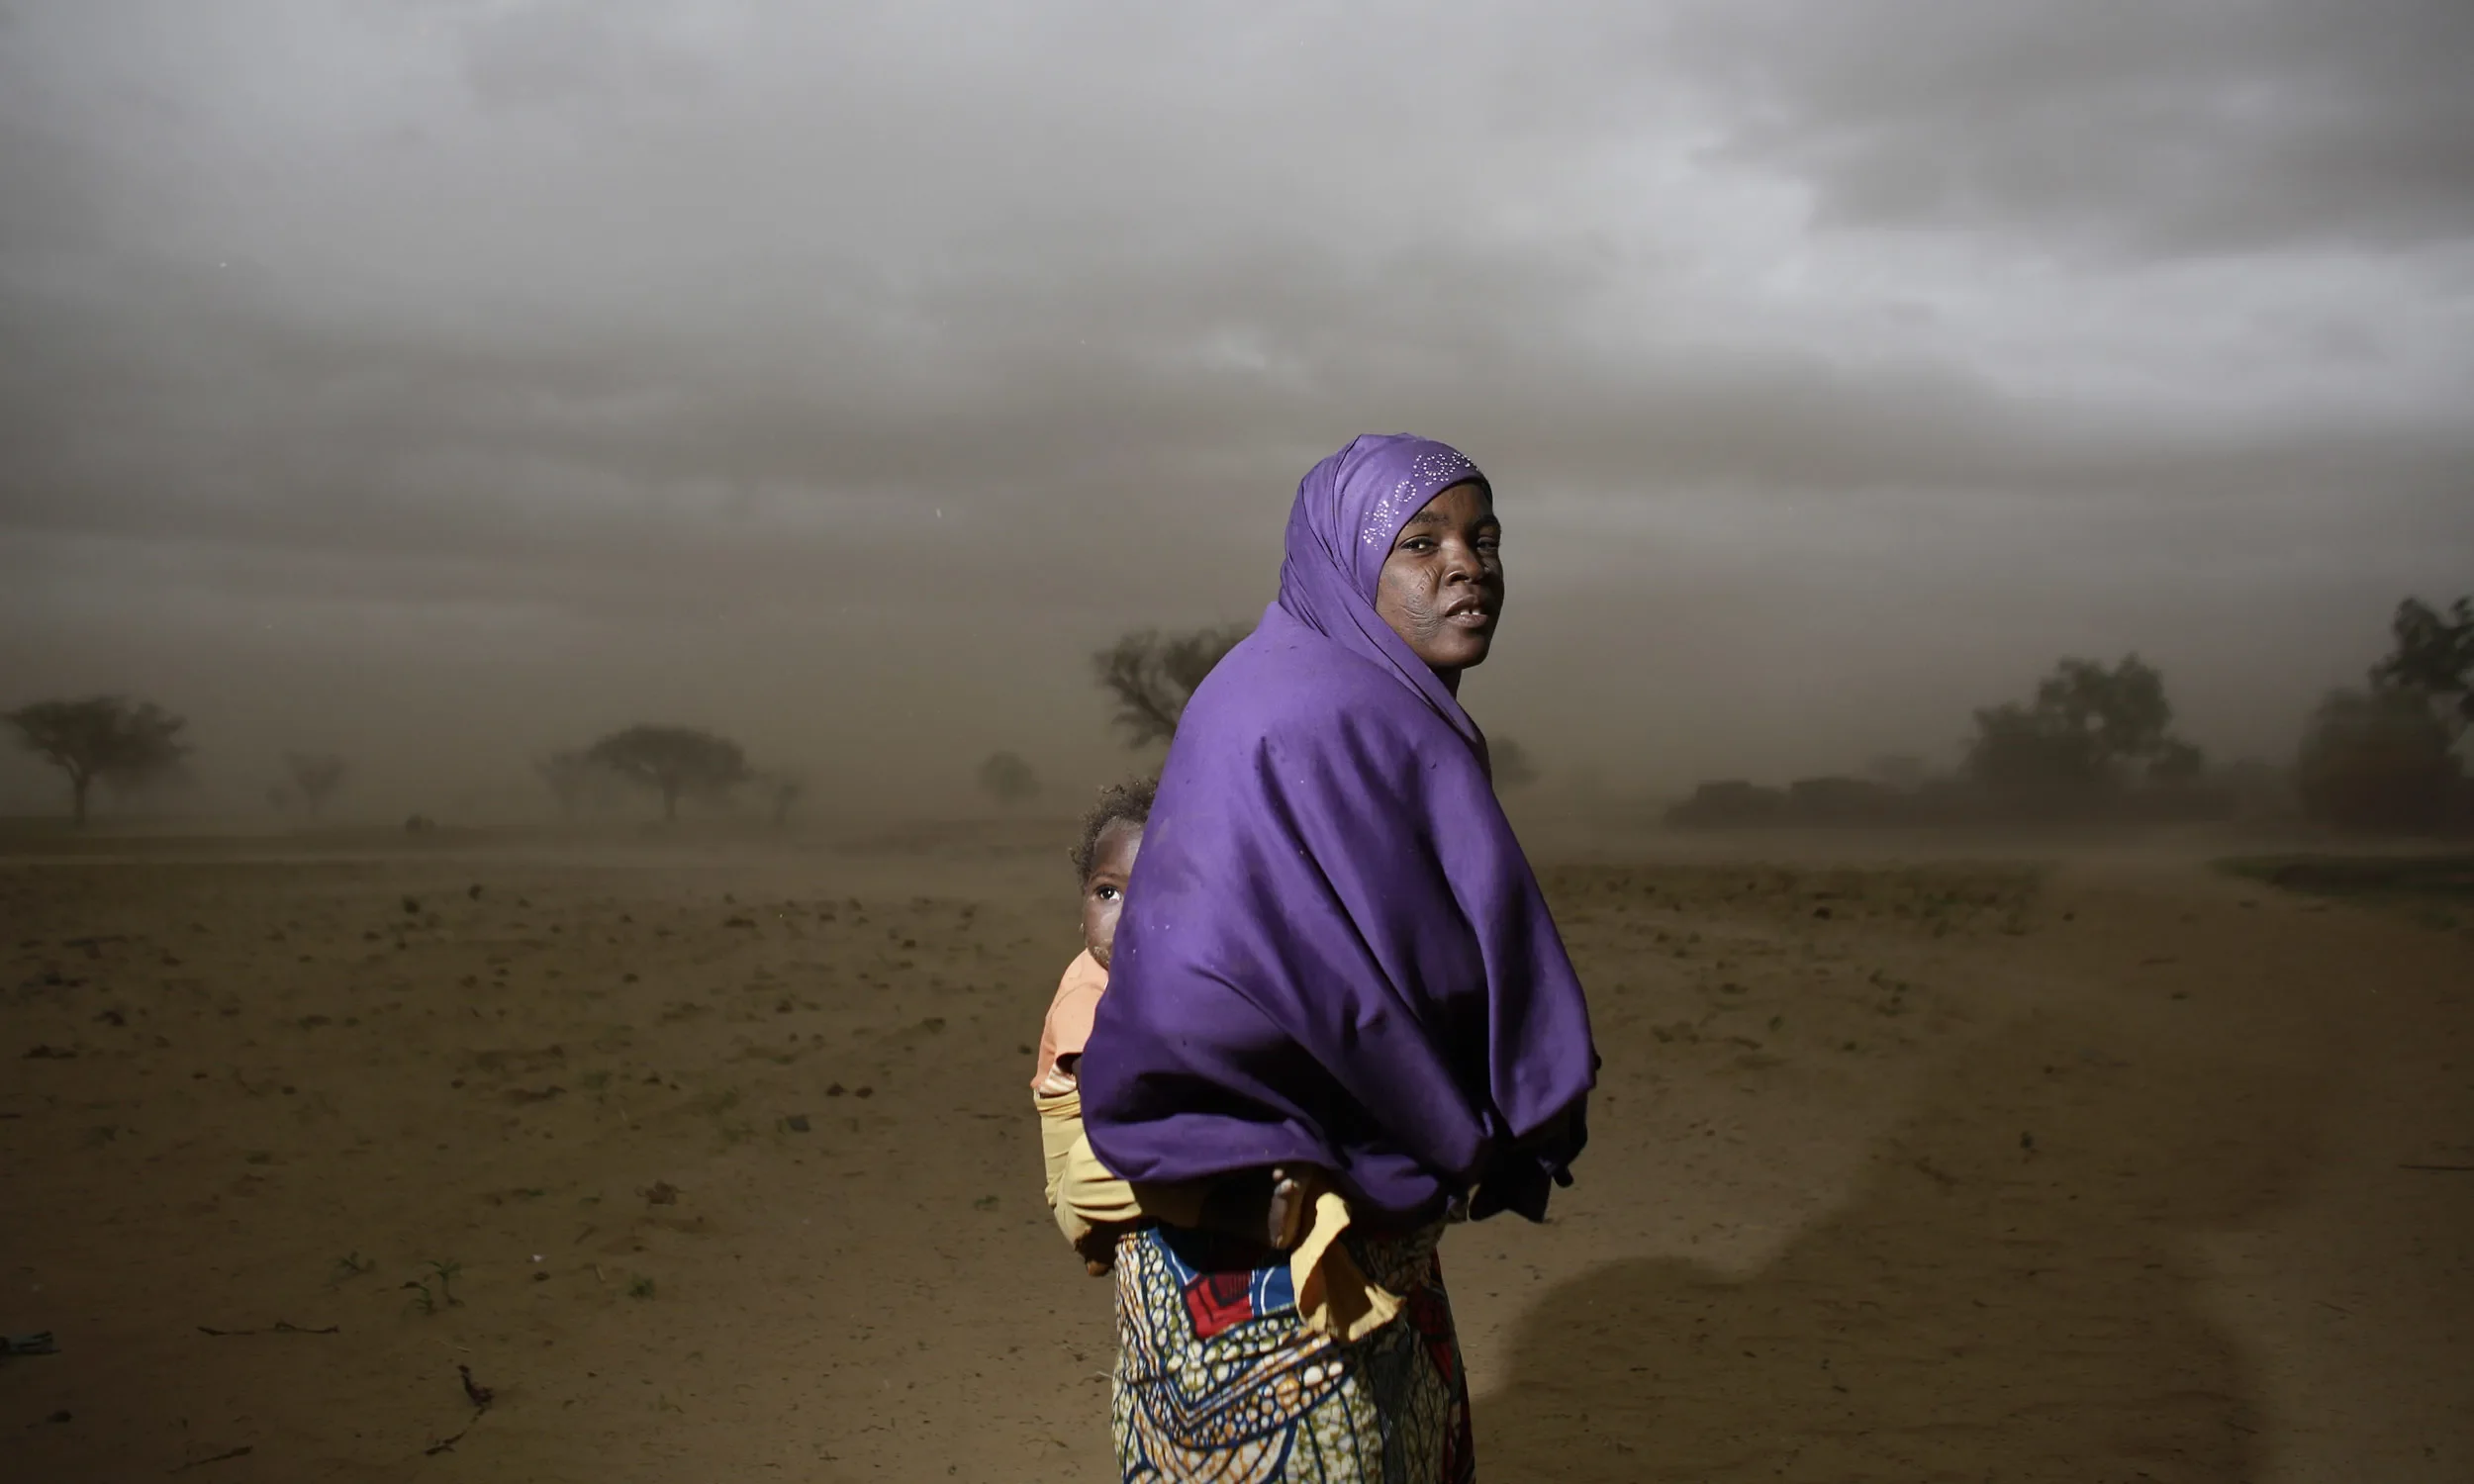 Woman in purple head covering and shawl, carrying a child on her back, looks back toward the camera with a grey landscape in the background